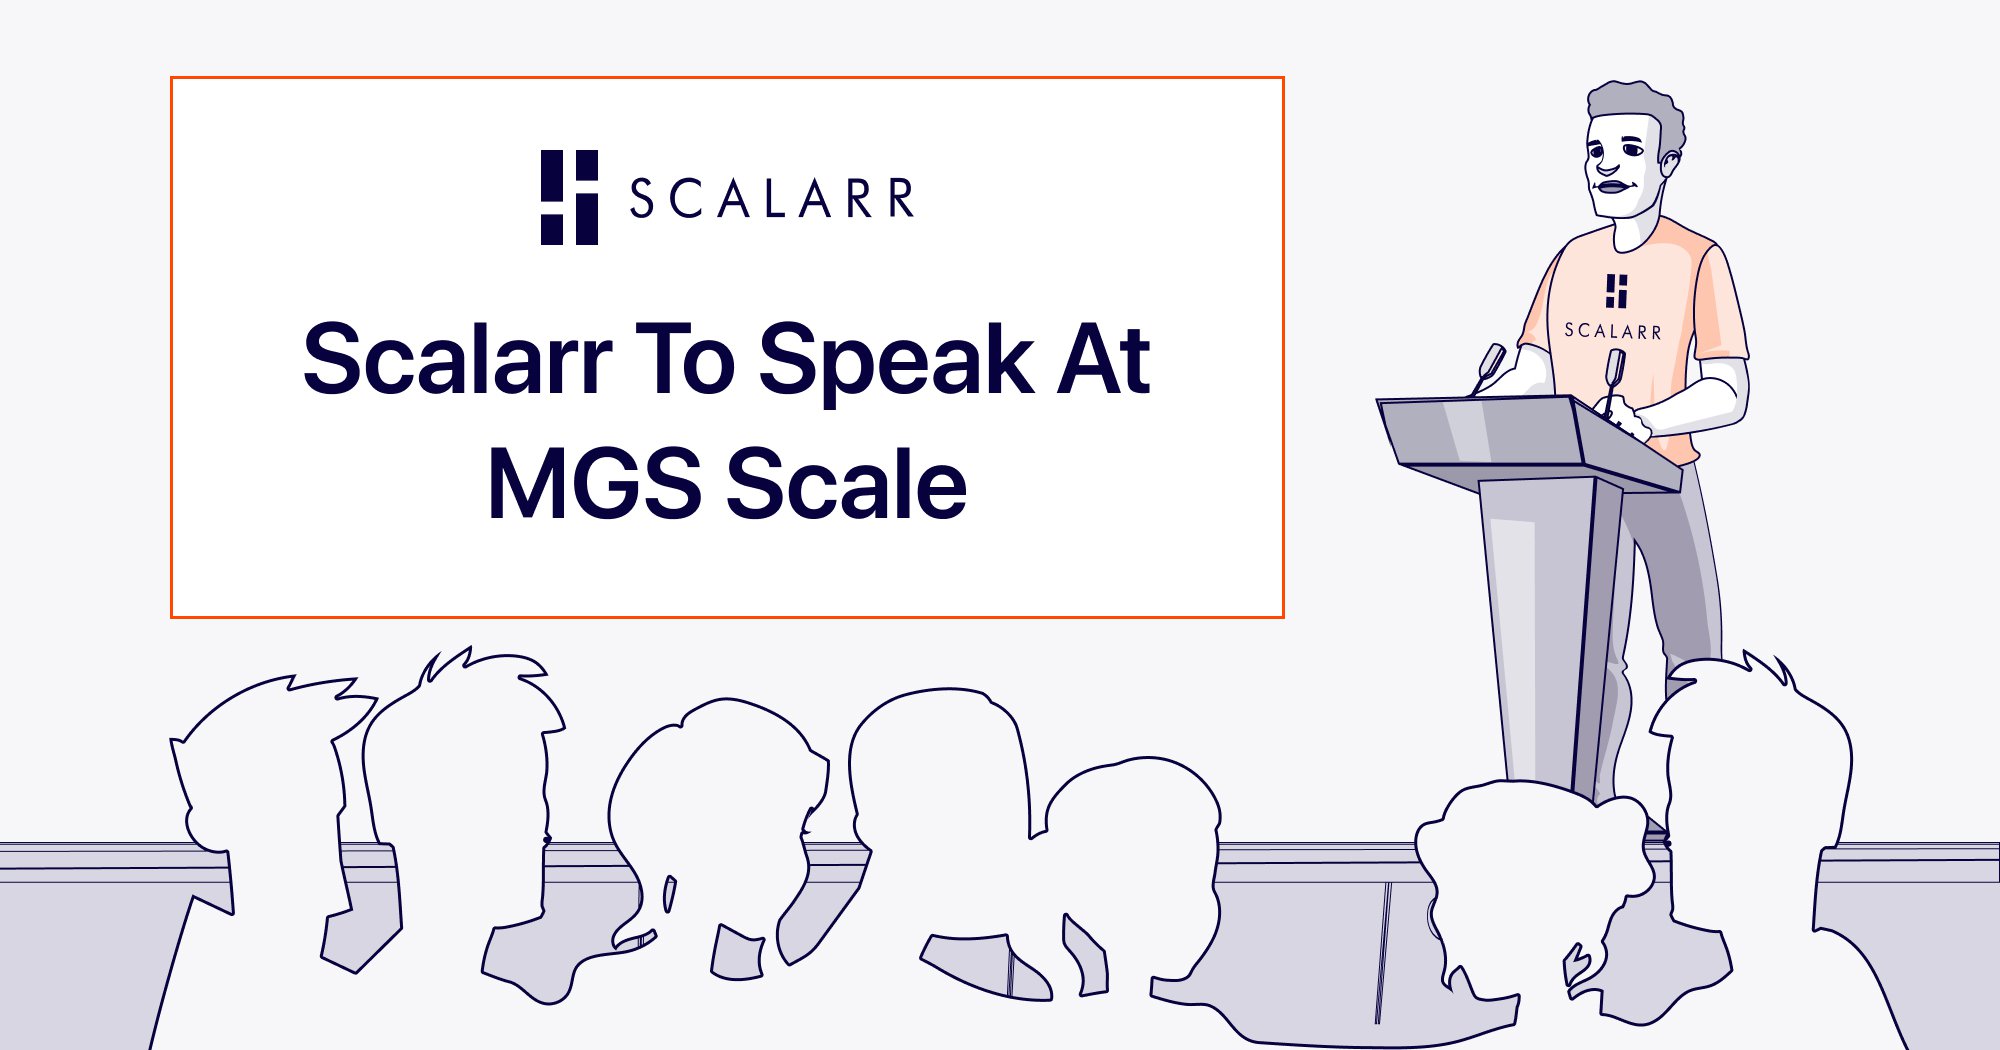 Scalarr Speaks at MGS Scale.jpg